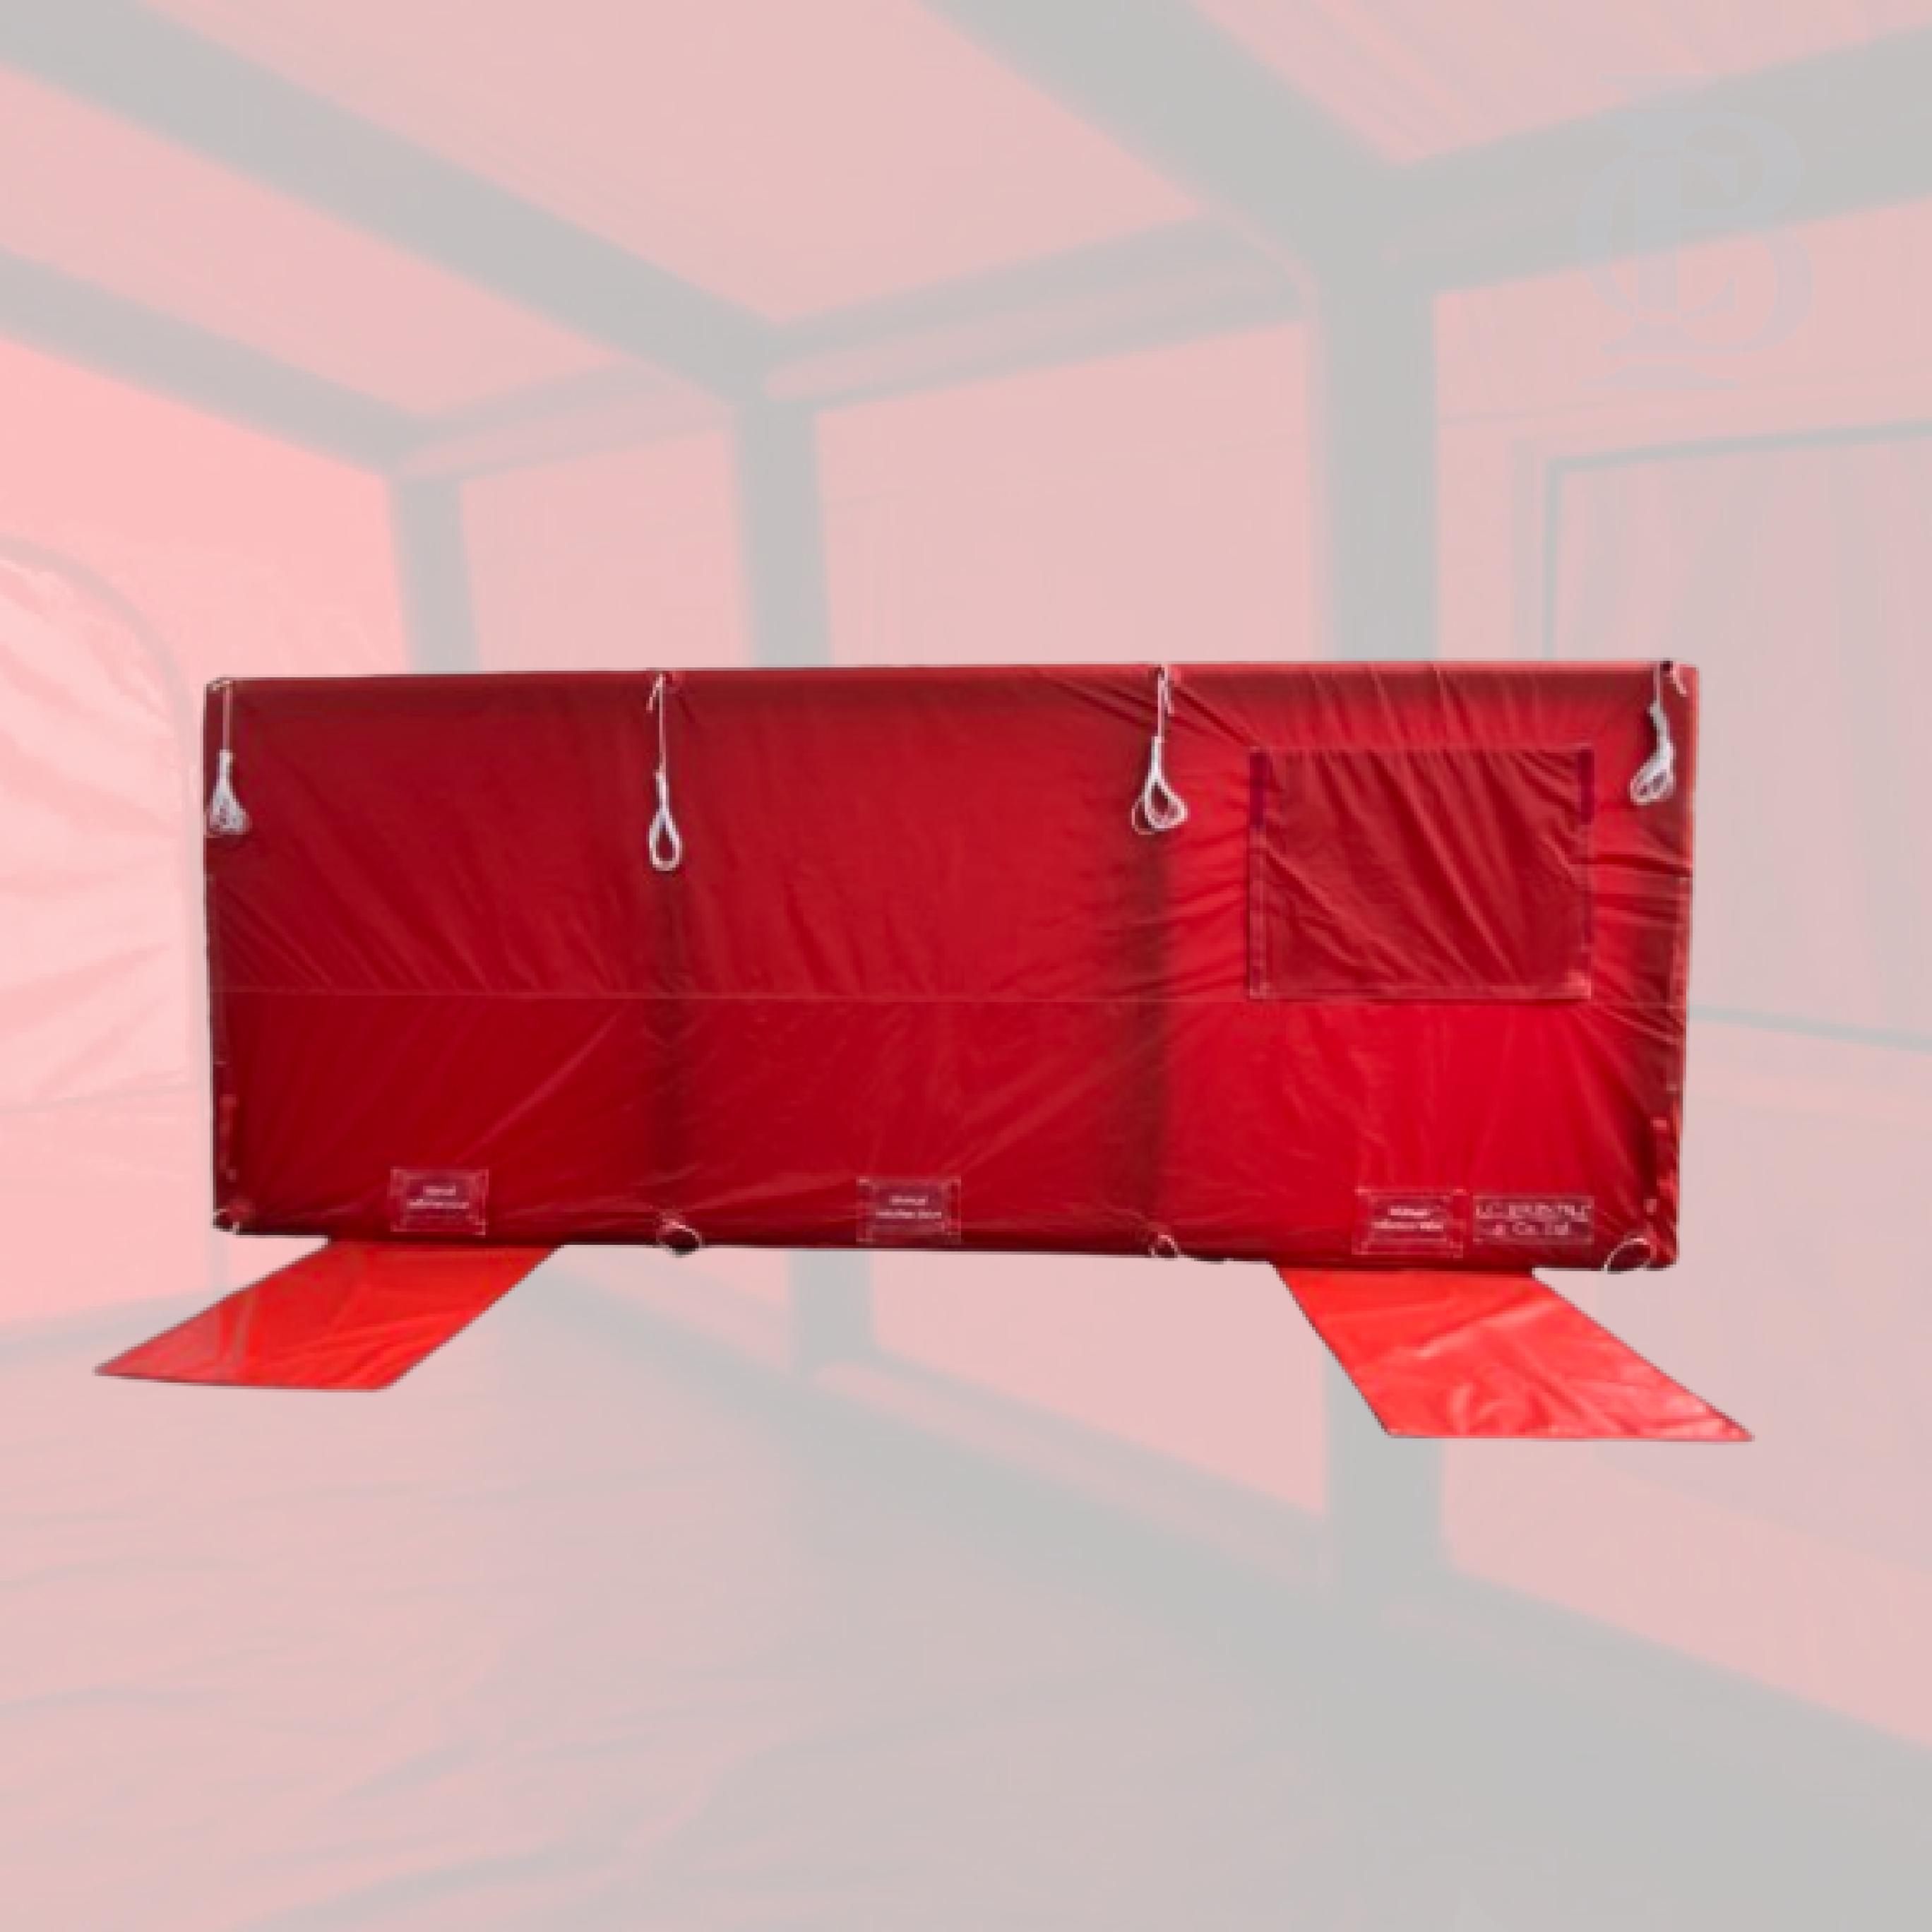 Emergency Inflatable Rescue Shelters, Tents Walkways & Cushions